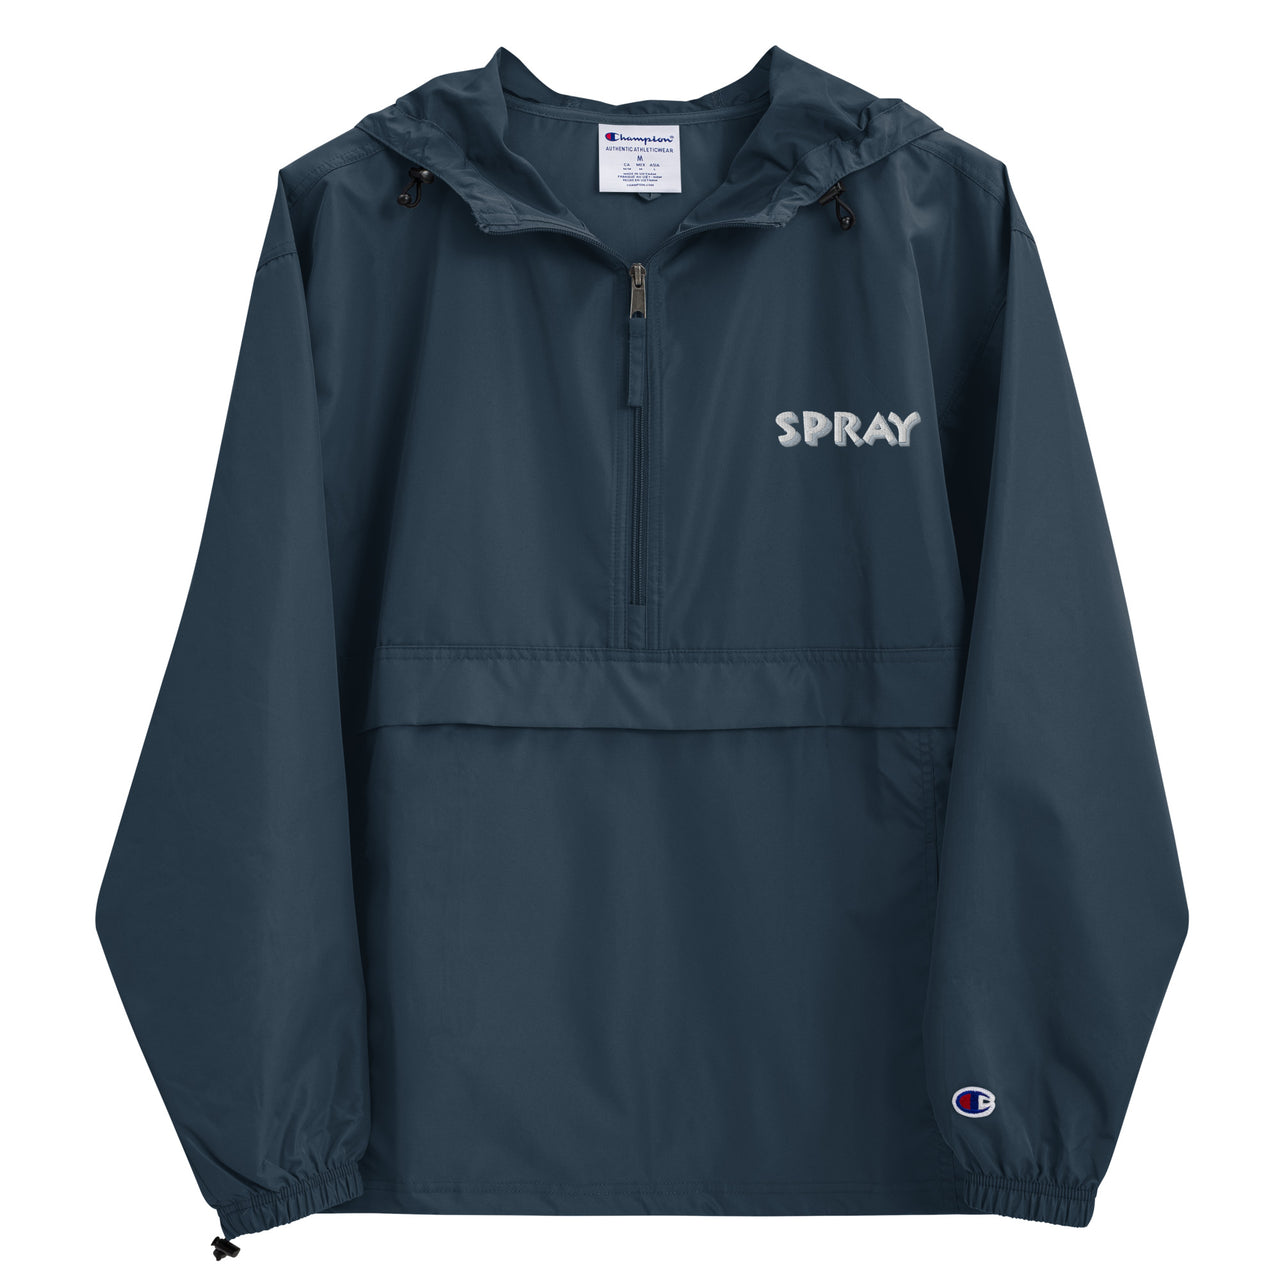 SPRAY- Embroidered Packable Windbreaker (Champion)